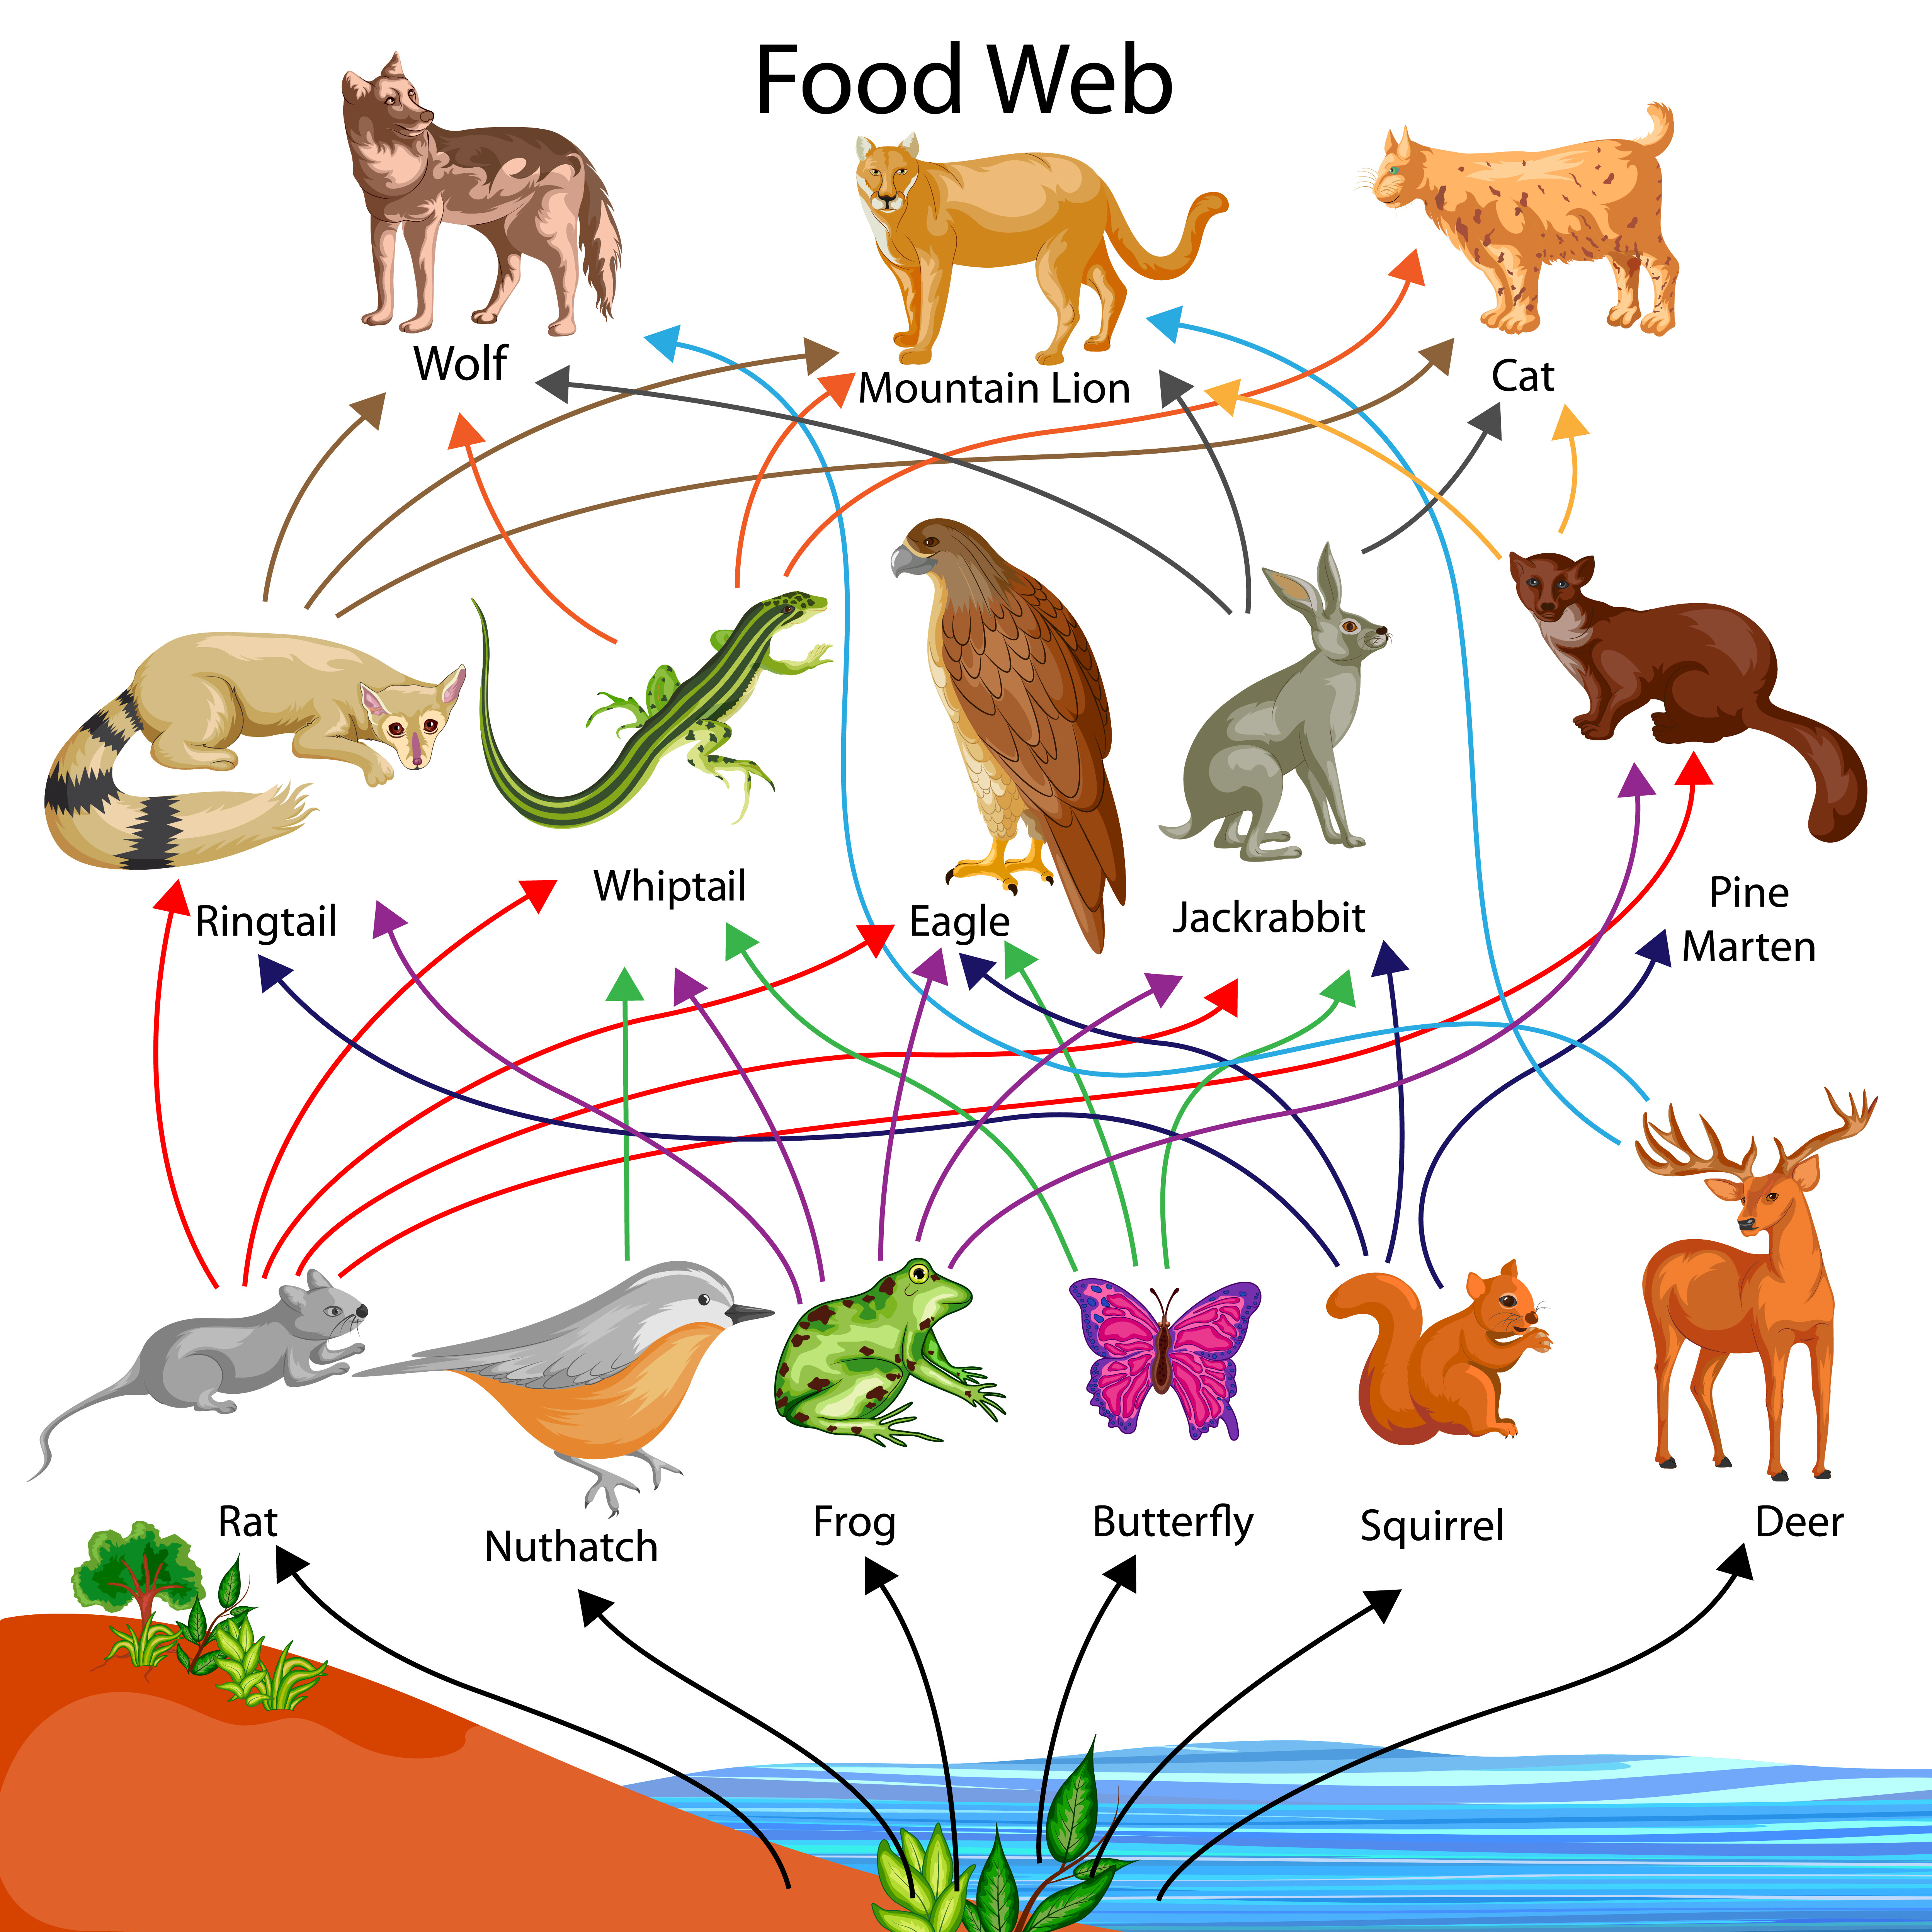 food chains diagrams